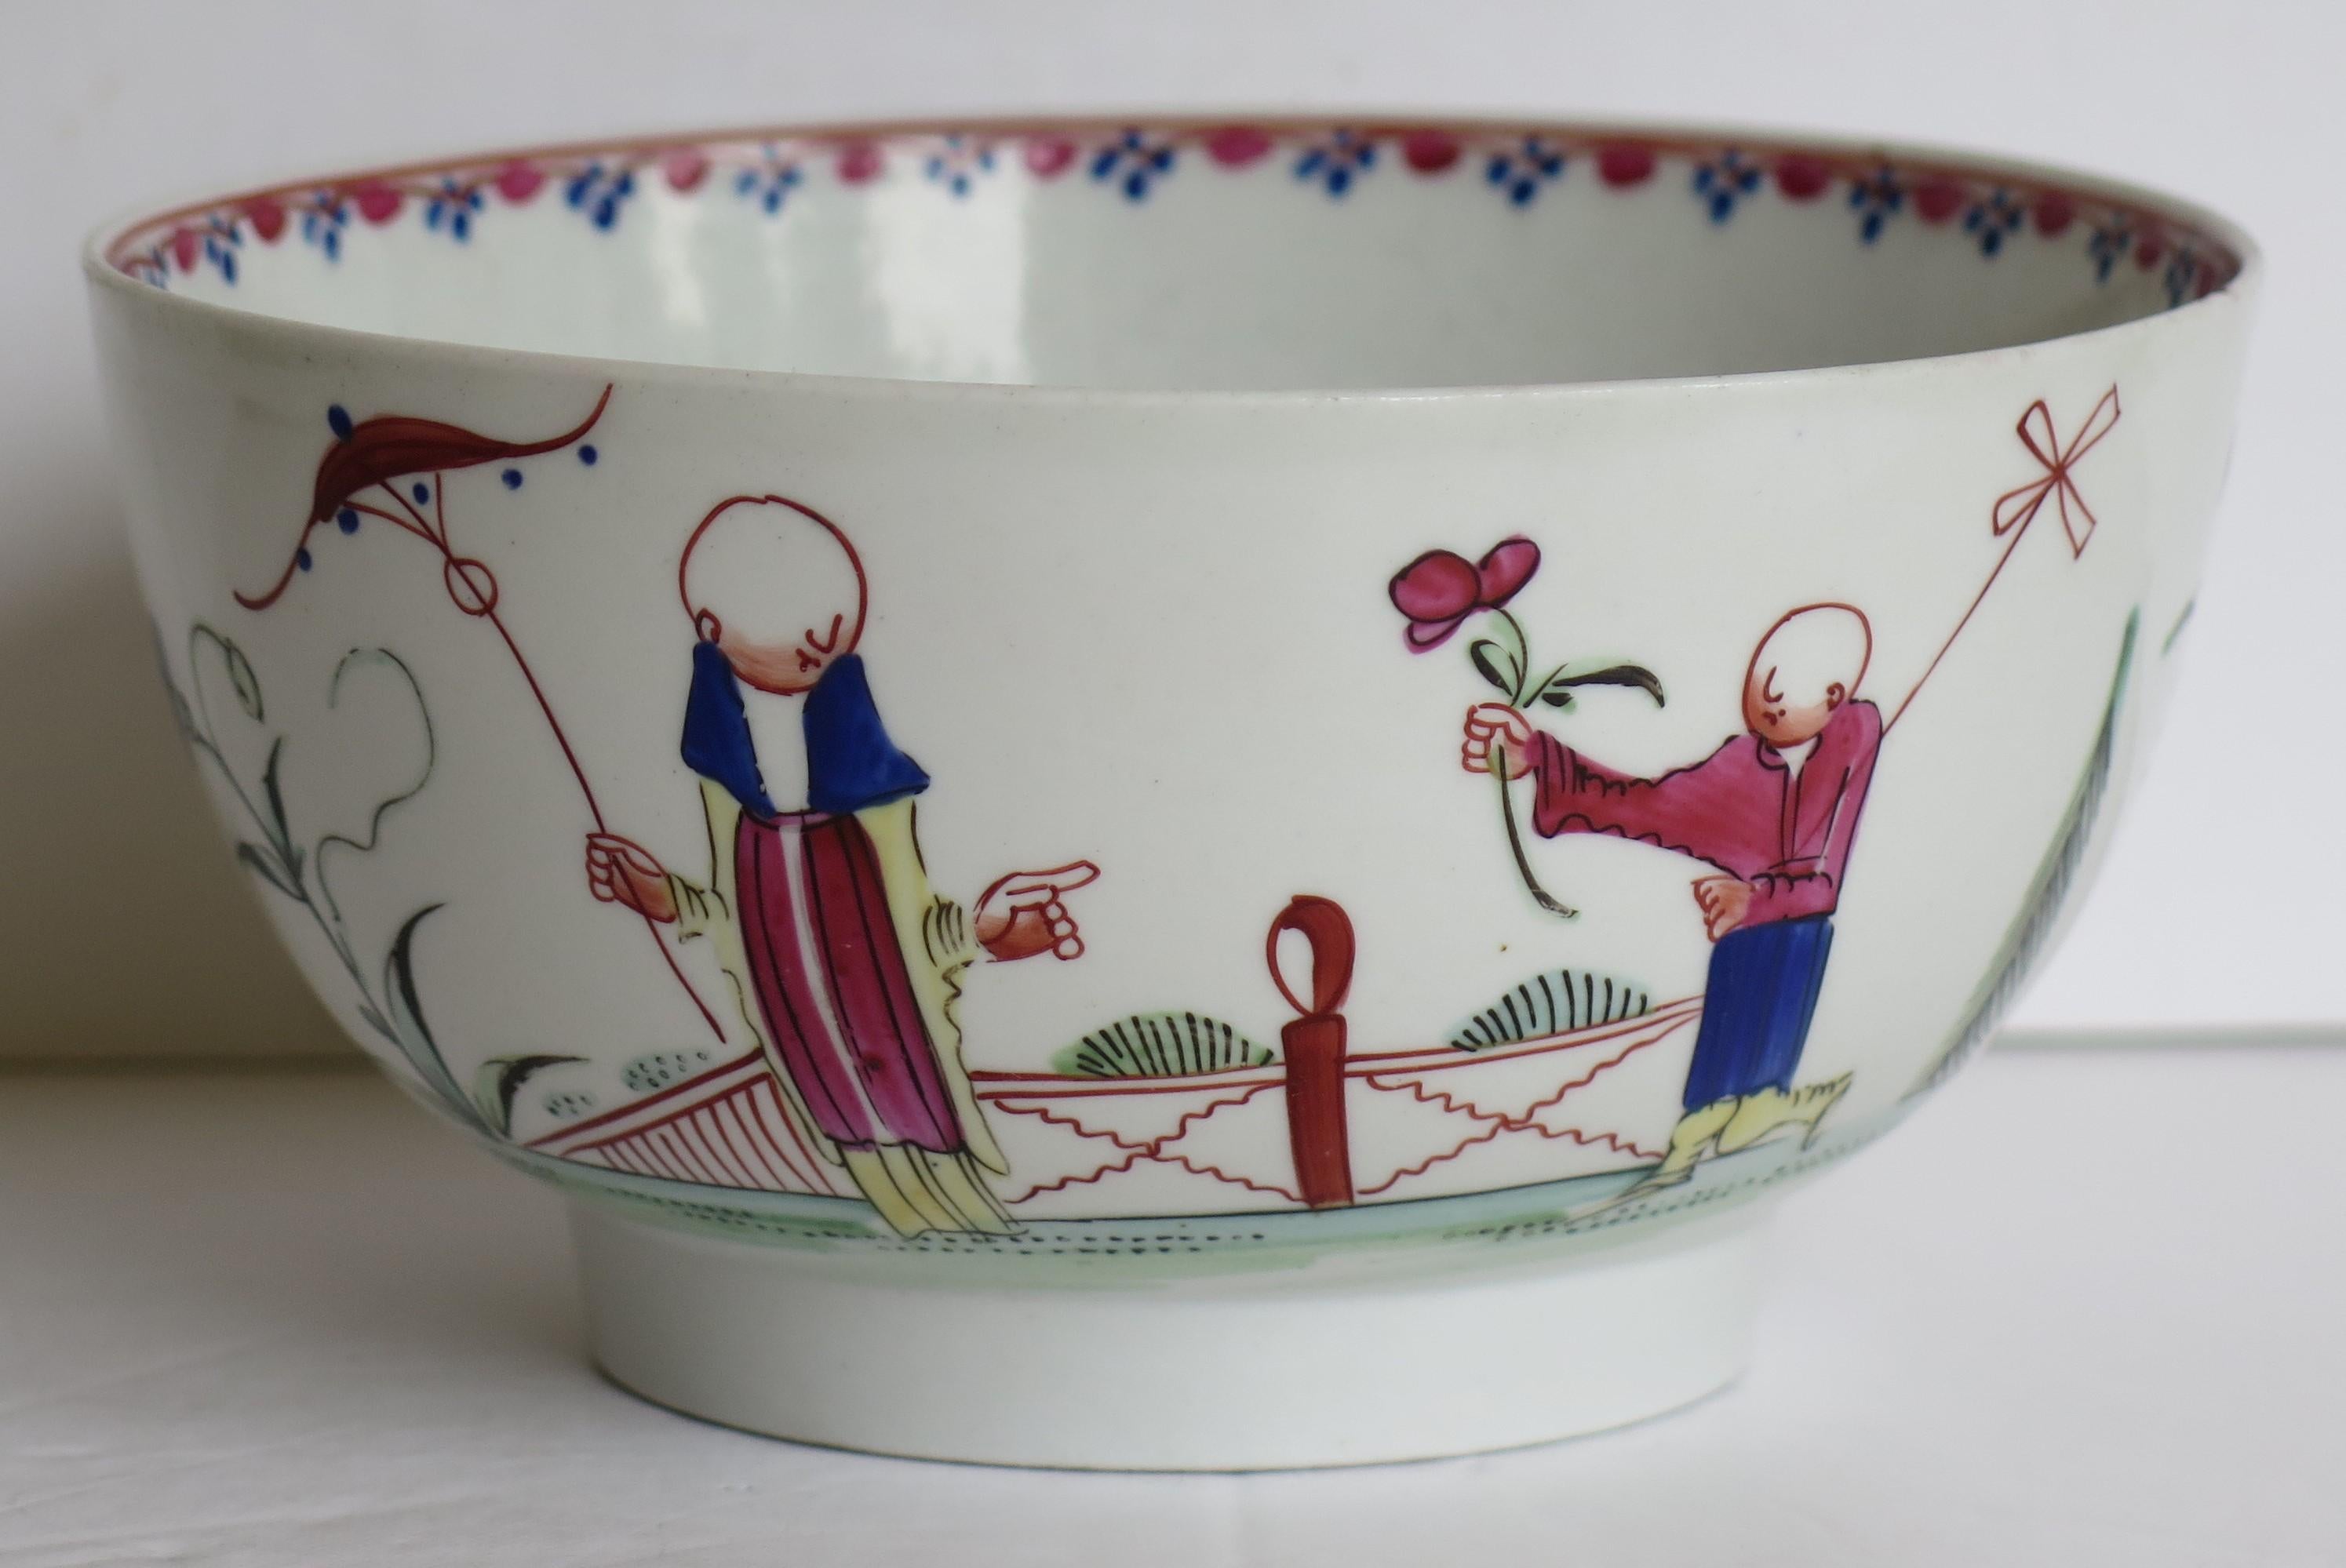 This is a hard paste porcelain waste or slop bowl by New Hall in a hand painted Chinoiserie figure pattern No. 20, dating to the late 18th century, circa 1790.

The bowl is well potted on a mid depth foot. 

The decoration is hand-painted using